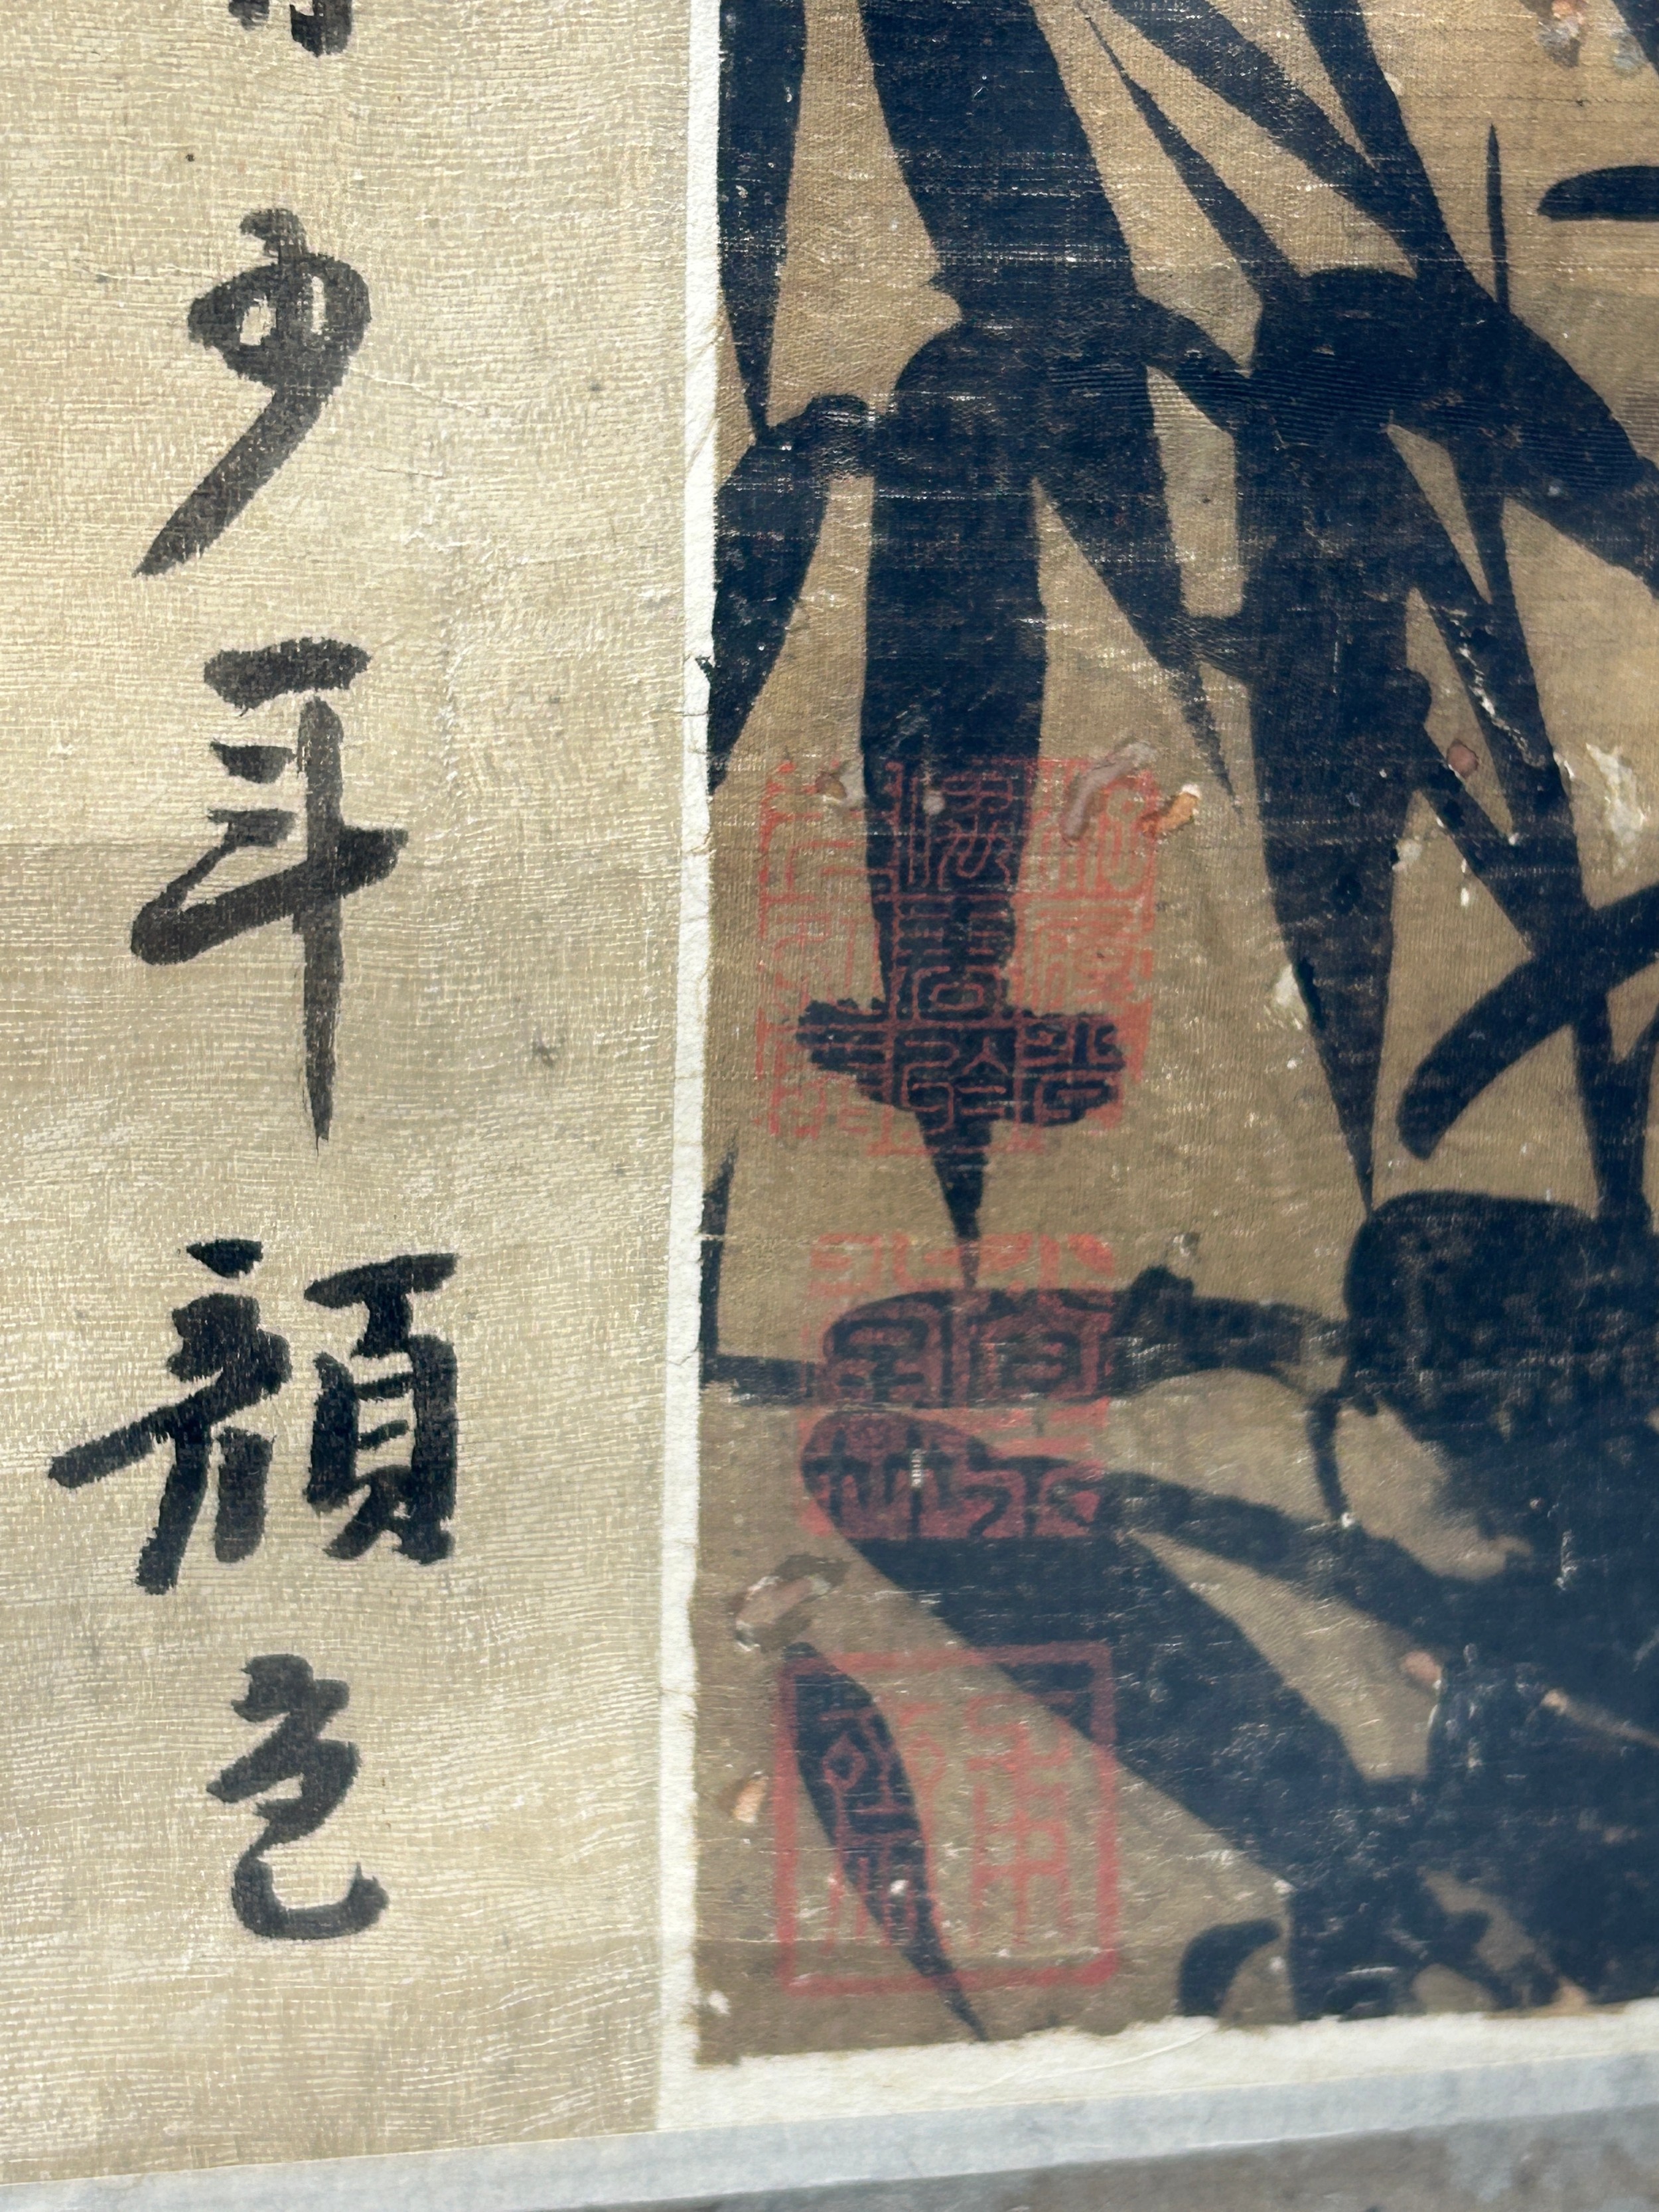 AFTER SU SHI (SU DONGPO) (1037-1101) : A PAINTING ON SCROLL DEPICTING BAMBOO STALKS WITH WRITING - Image 10 of 17